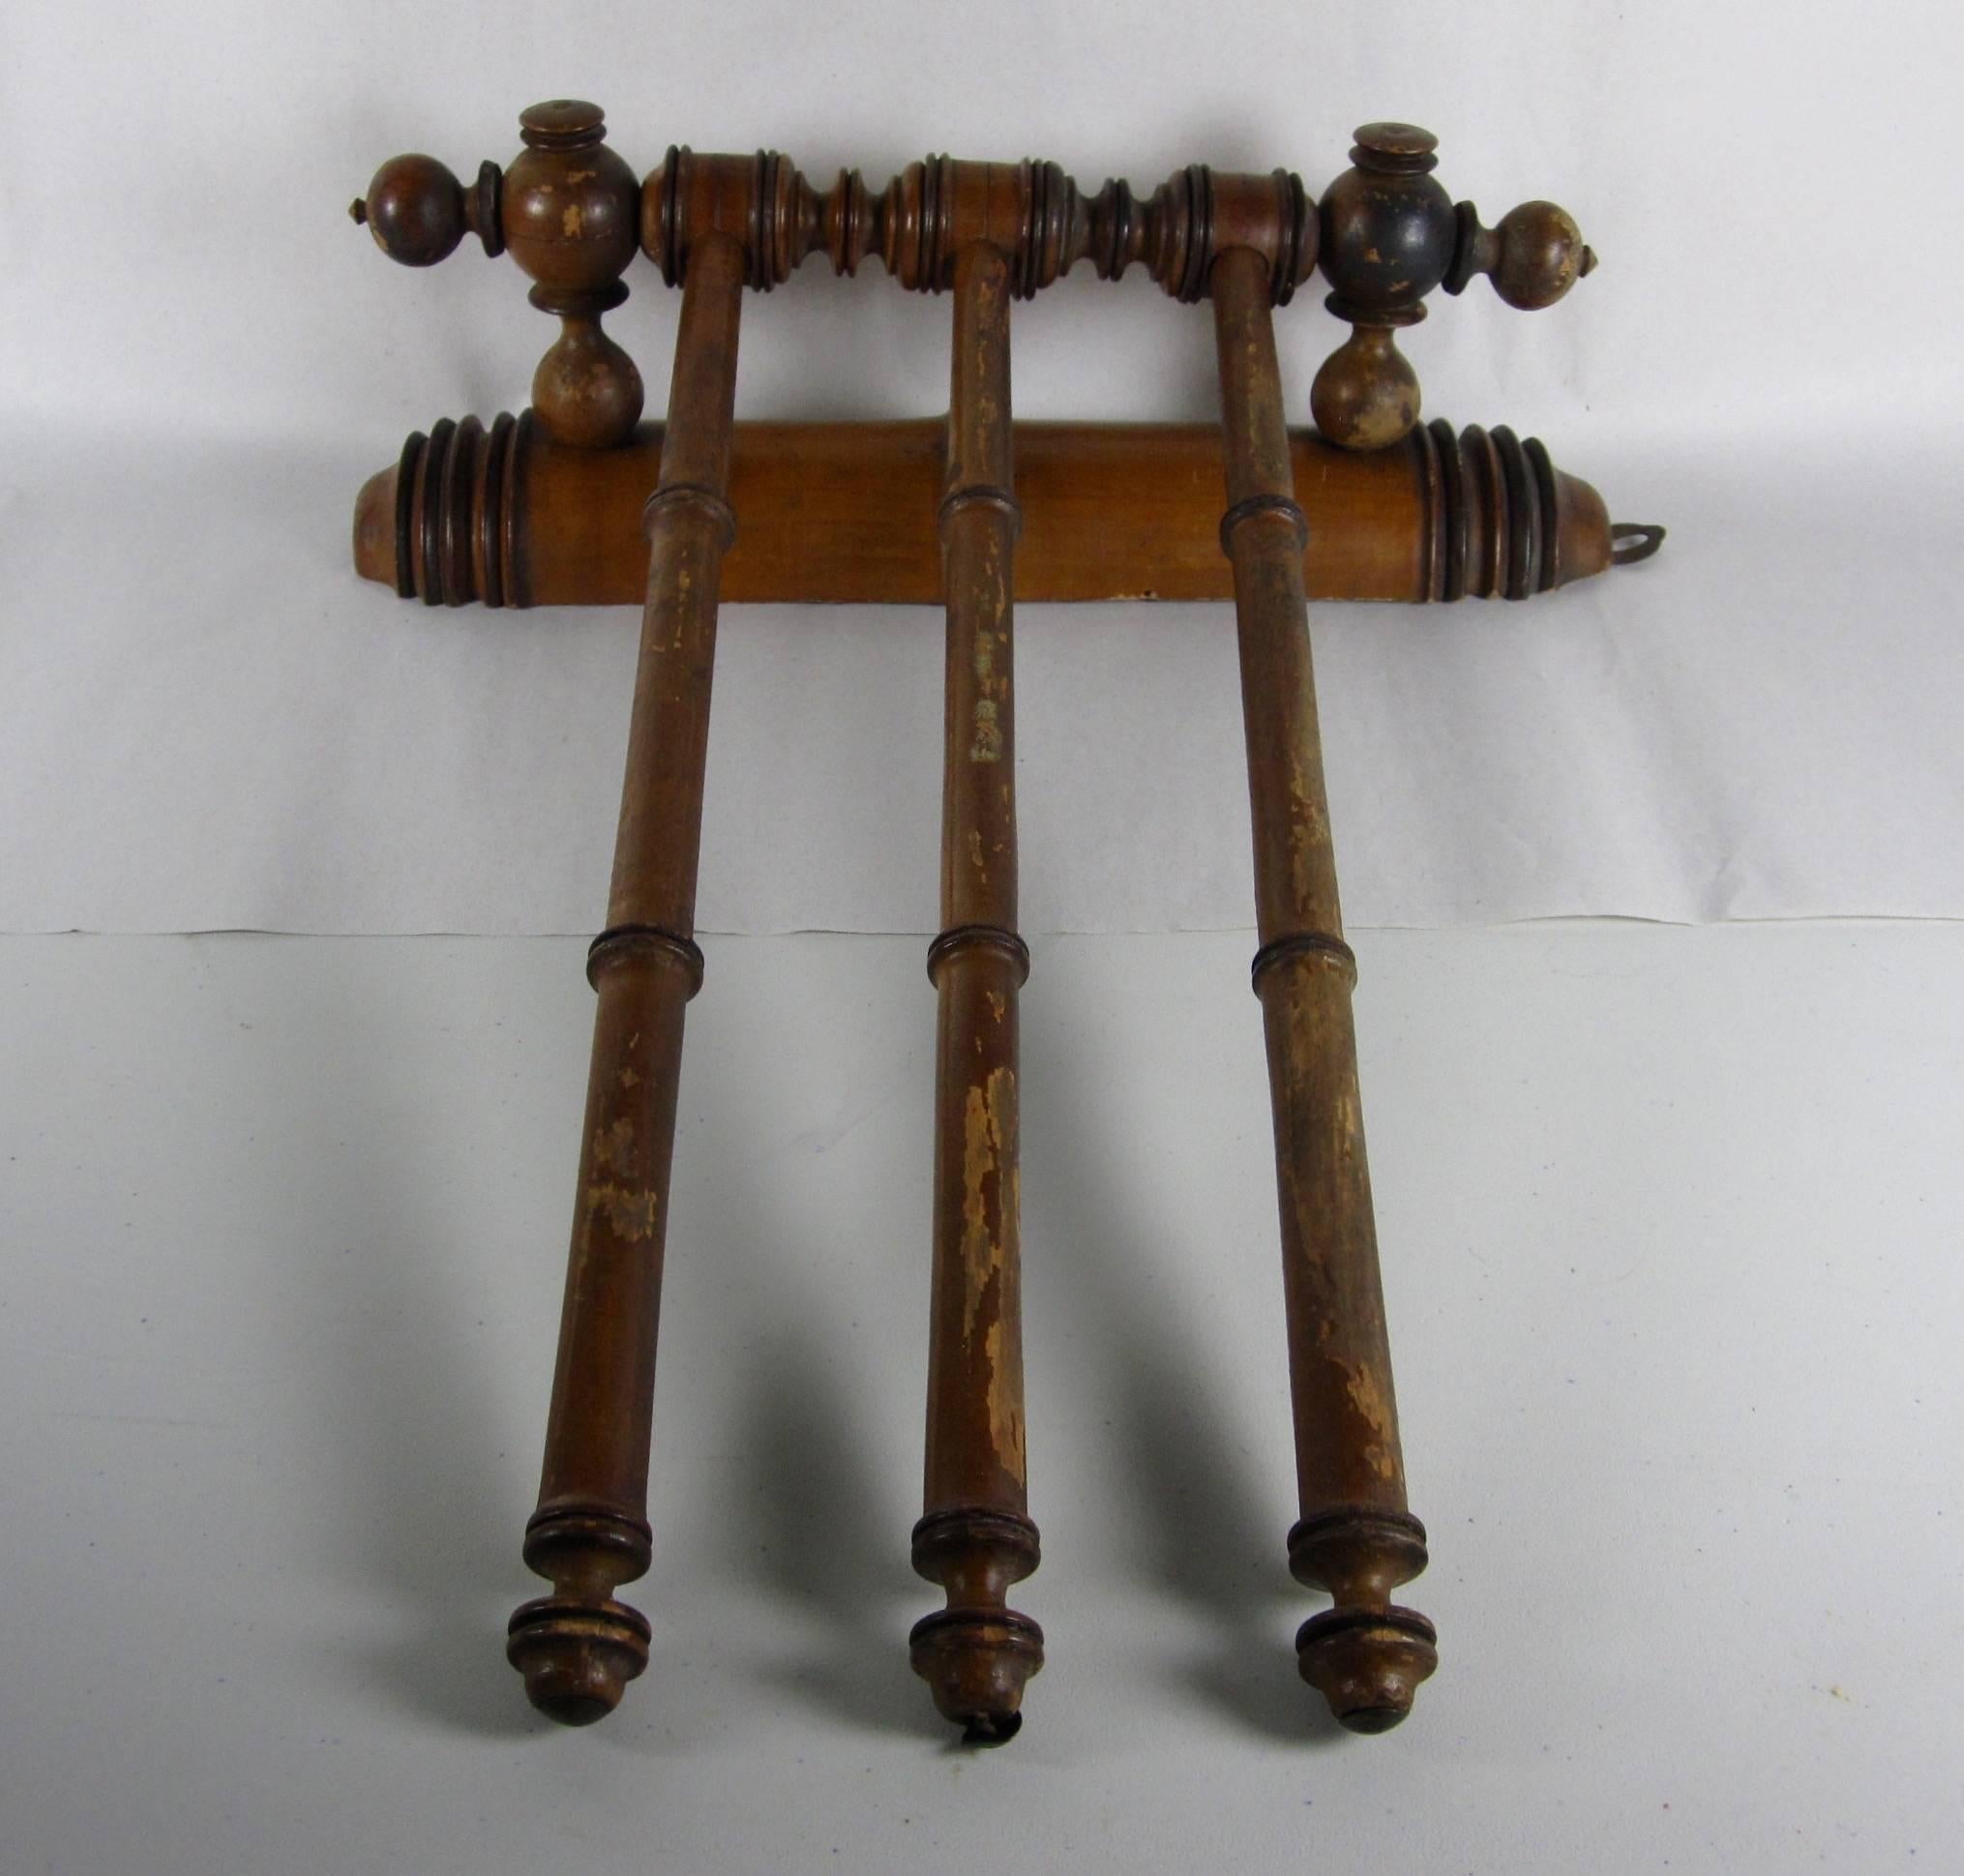 As seen in the cafes, kitchens and baths of France, this perfectly charming antique hand or dish towel wall rack with three swing arms is made of stained fruitwood and made to imitate bamboo. The three tapered arms swing right and left to allow